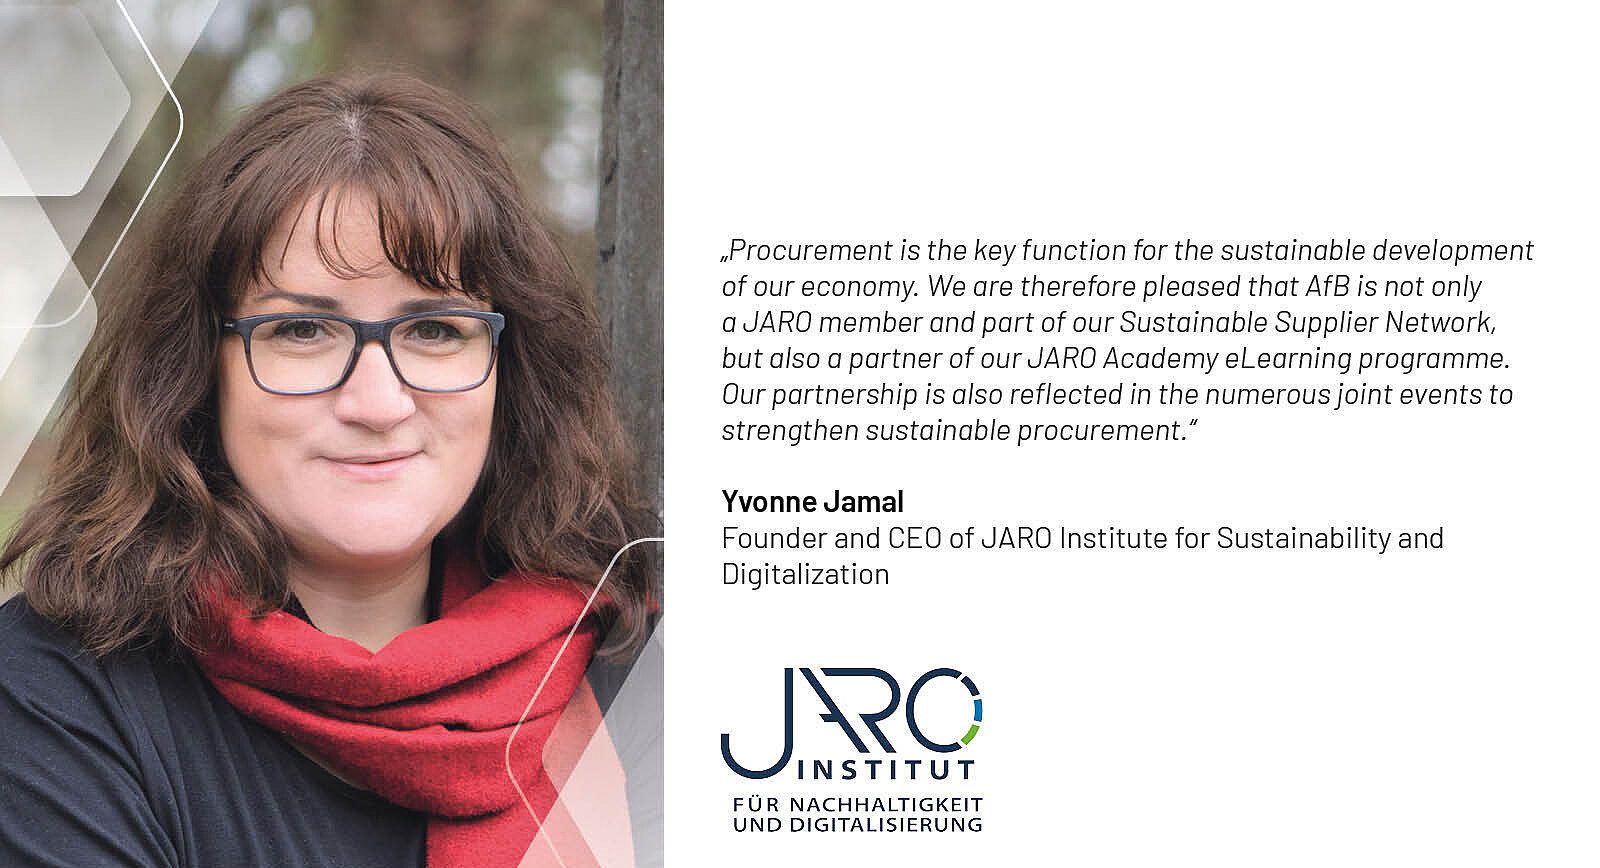 Yvonne Kamal, Founder and CEO of the JARO Institute for Sustainability and Digitalization. She has shoulder-length brown hair, wears glasses, a red scarf and a black shirt. On the right is her quote with the JARO logo: Procurement is the key function for the sustainable development of our economy. We are therefore pleased that AfB is not only a JARO member and part of our Sustainable Supplier Network, but also a partner of our JARO Academy eLearning programme. Our partnership is also reflected in the numerous joint events to strengthen sustainable procurement.